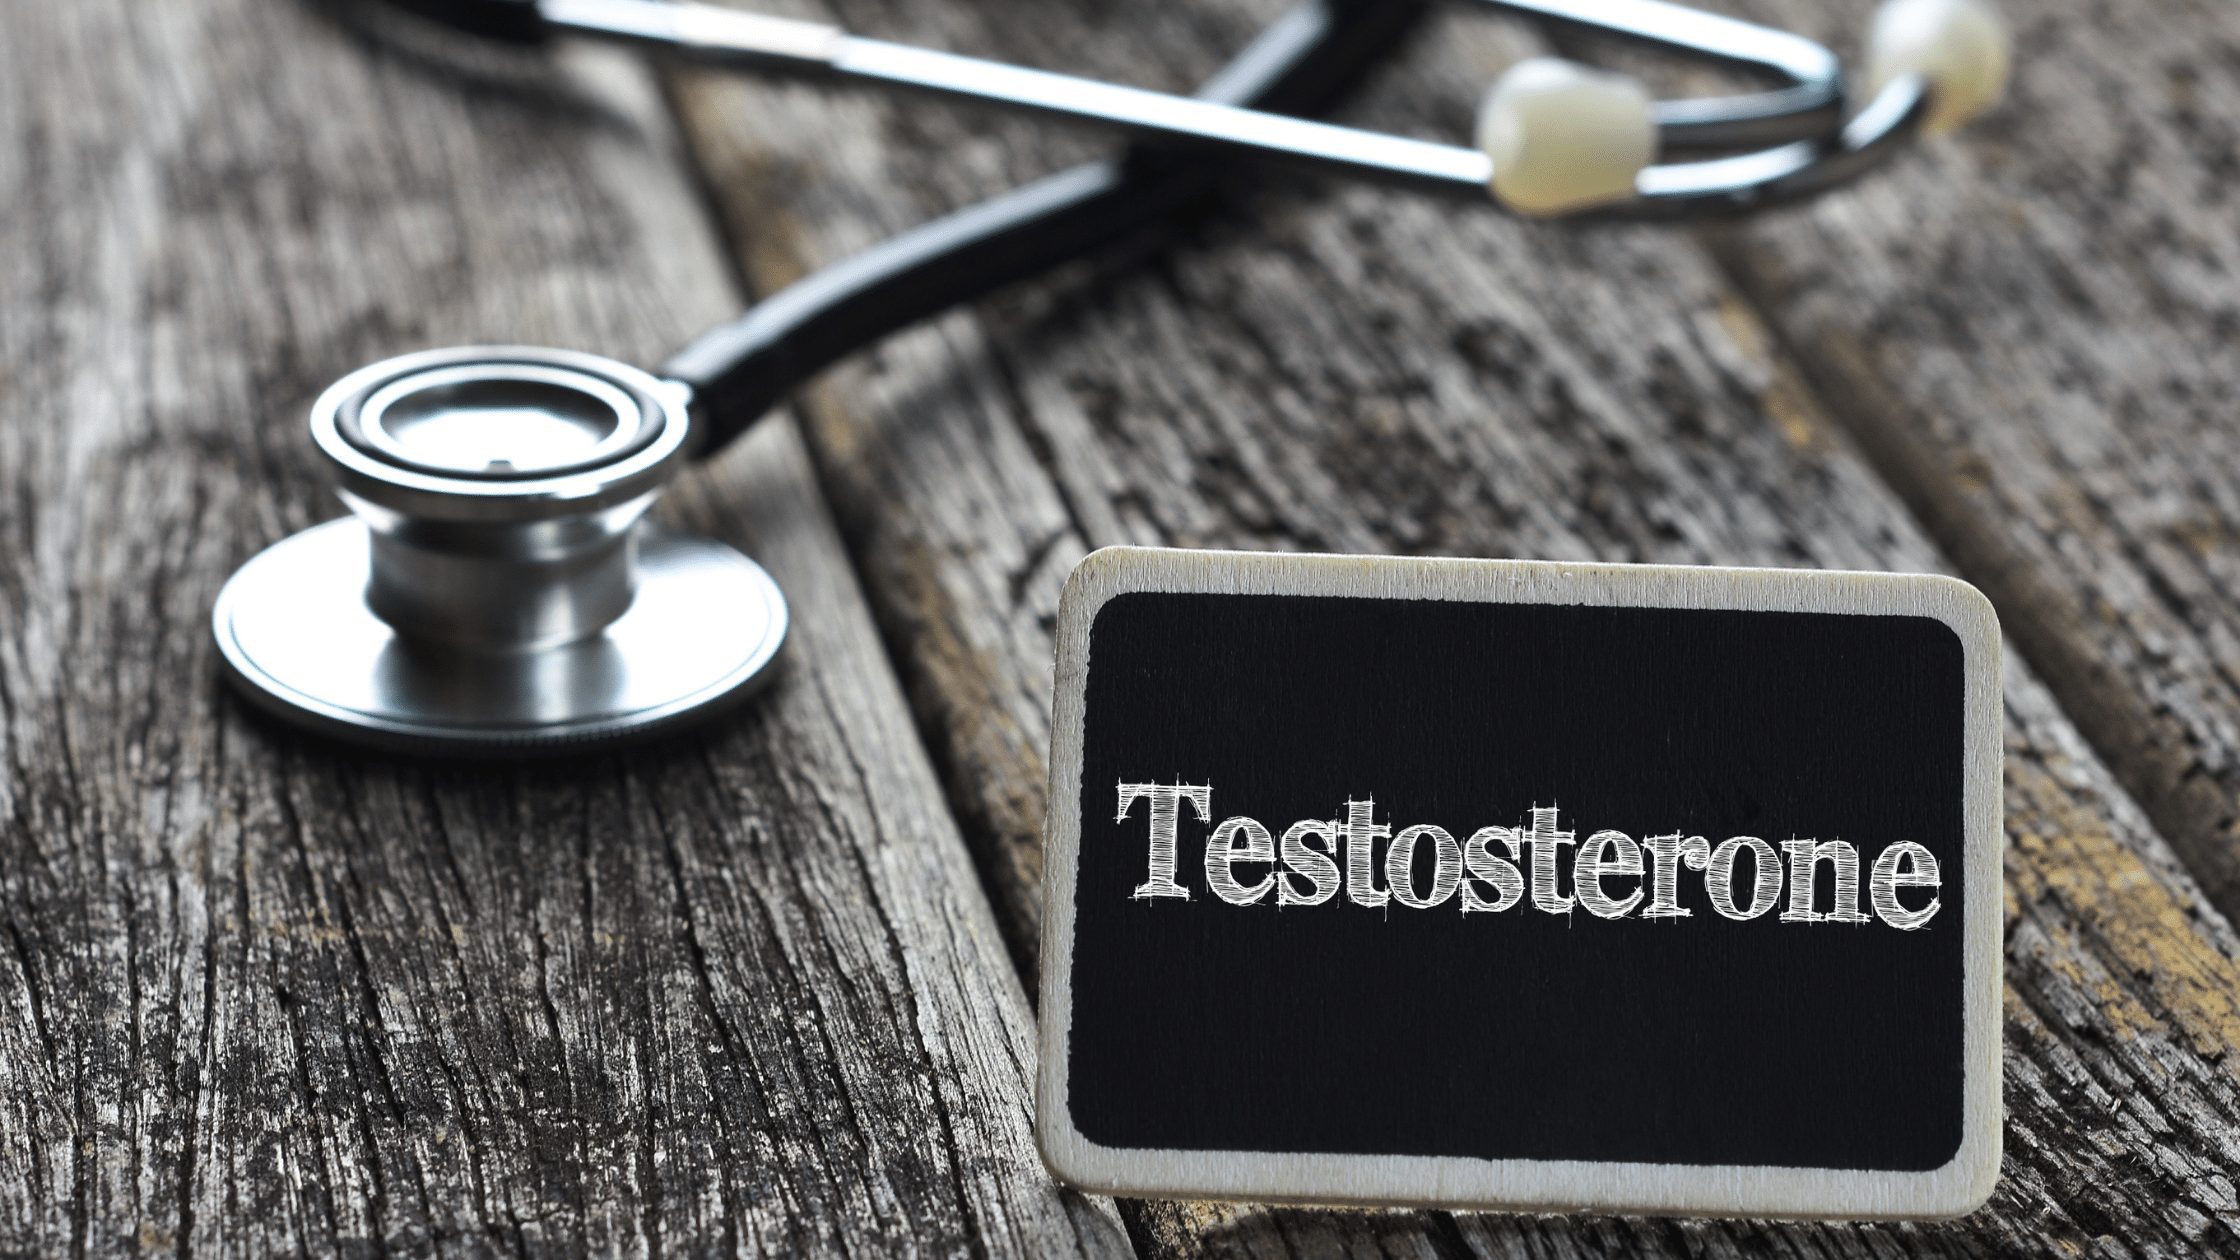 Testosterone written on a chalkboard with medical equipment in the background